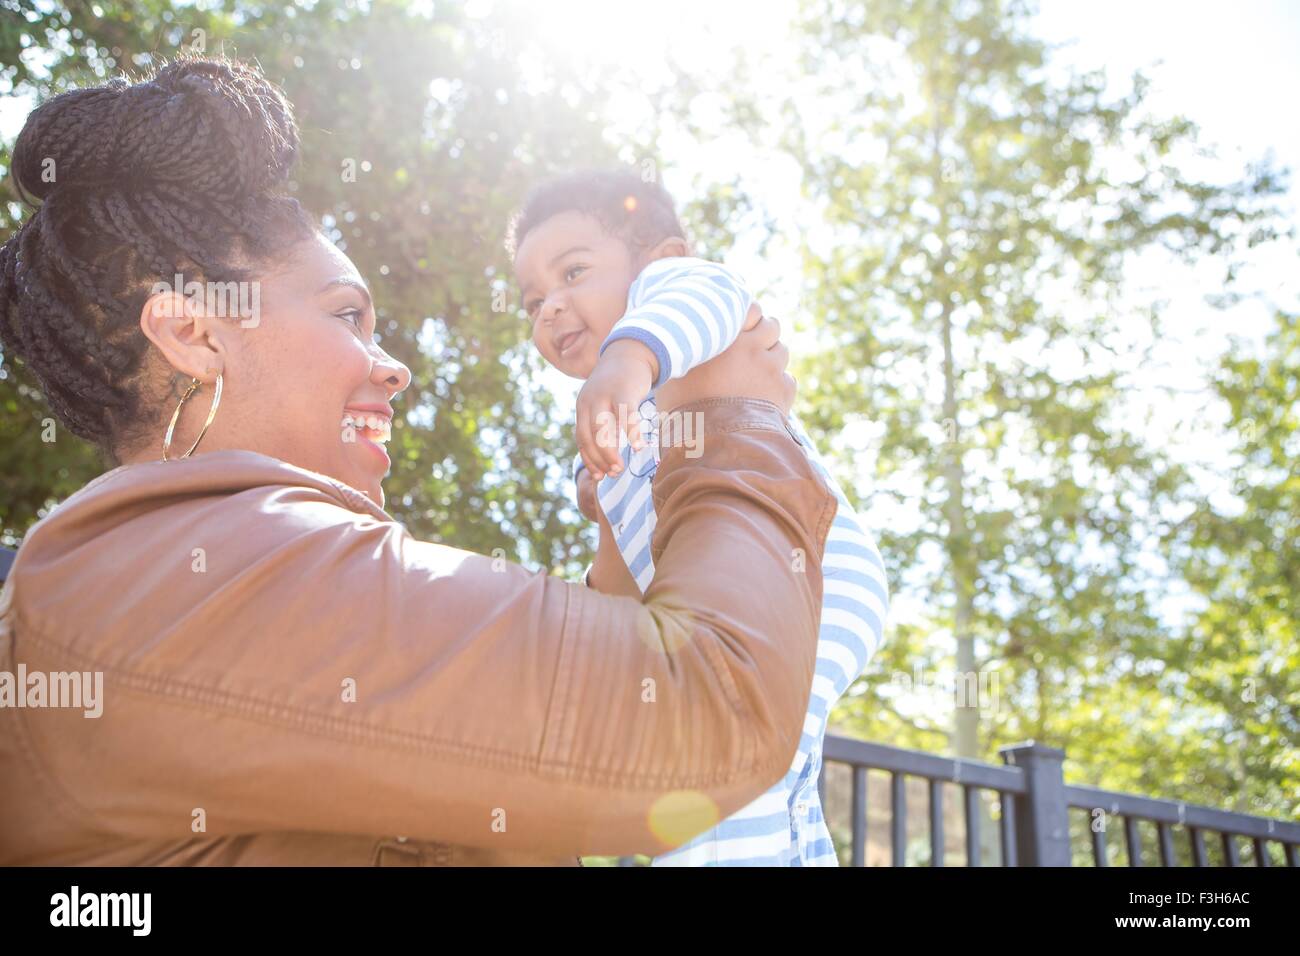 Mother holding up baby boy in park Stock Photo